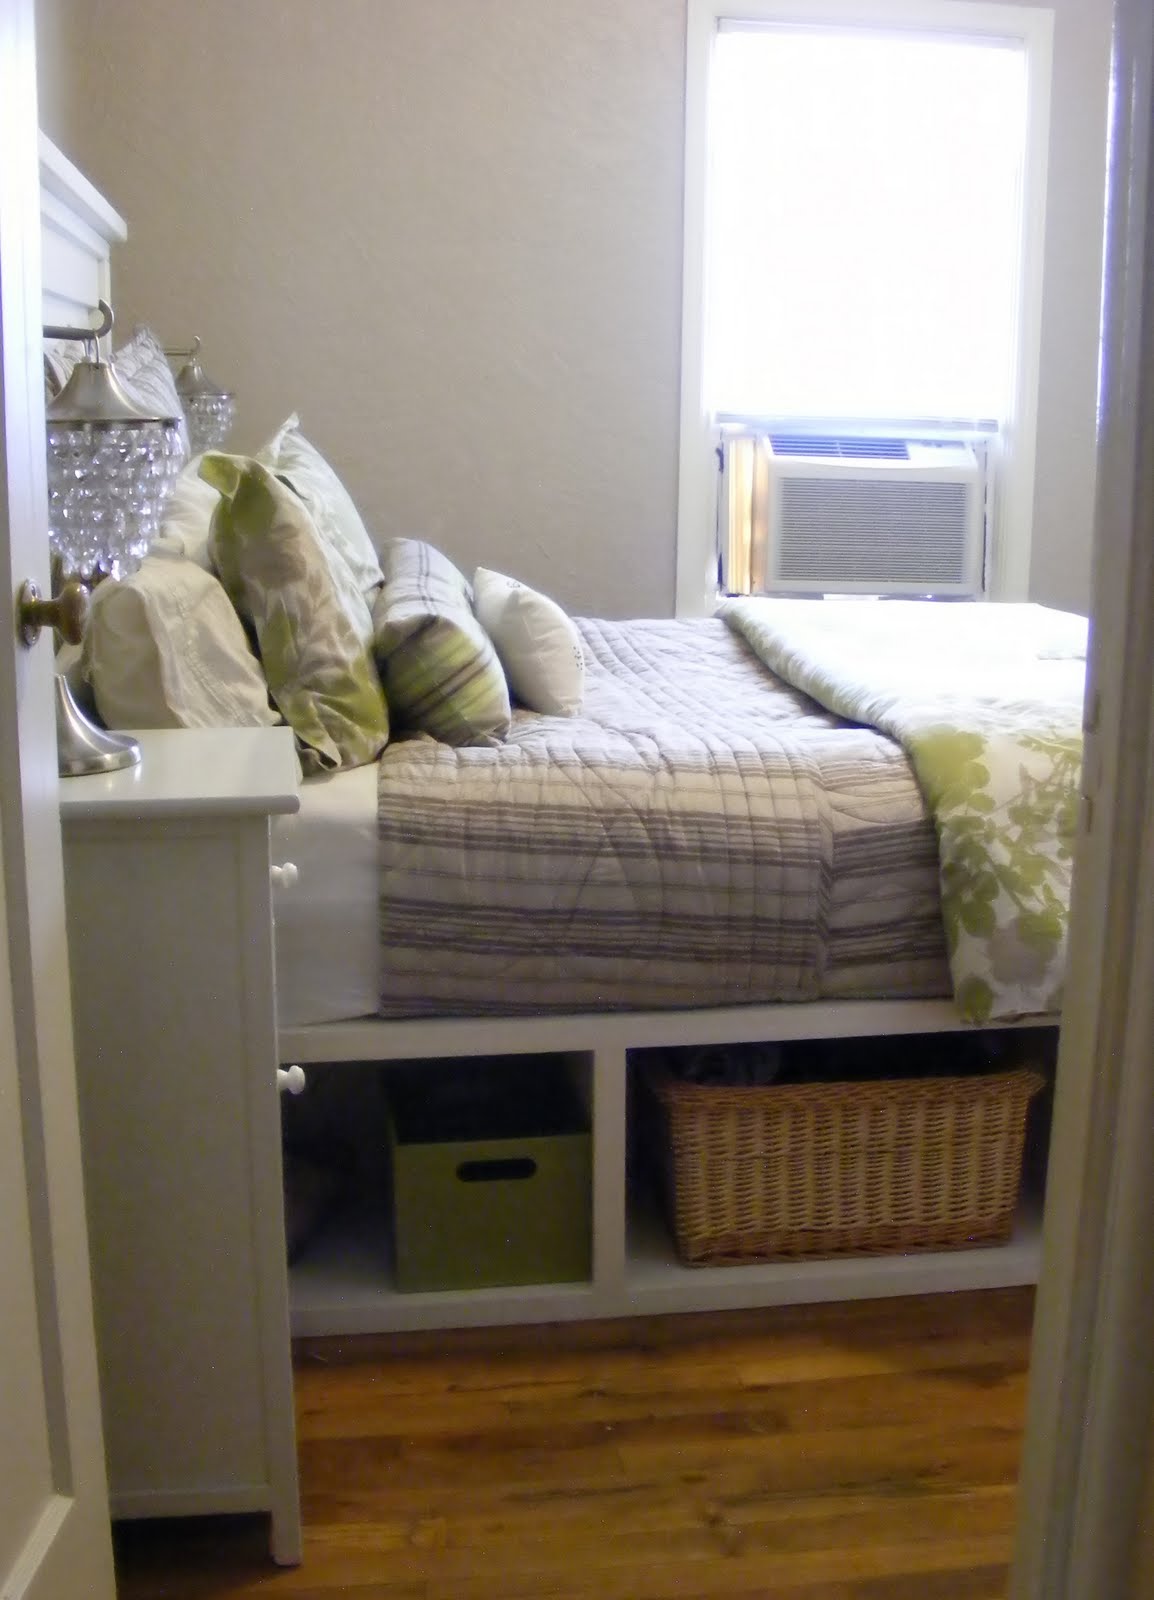 queen bed with drawers